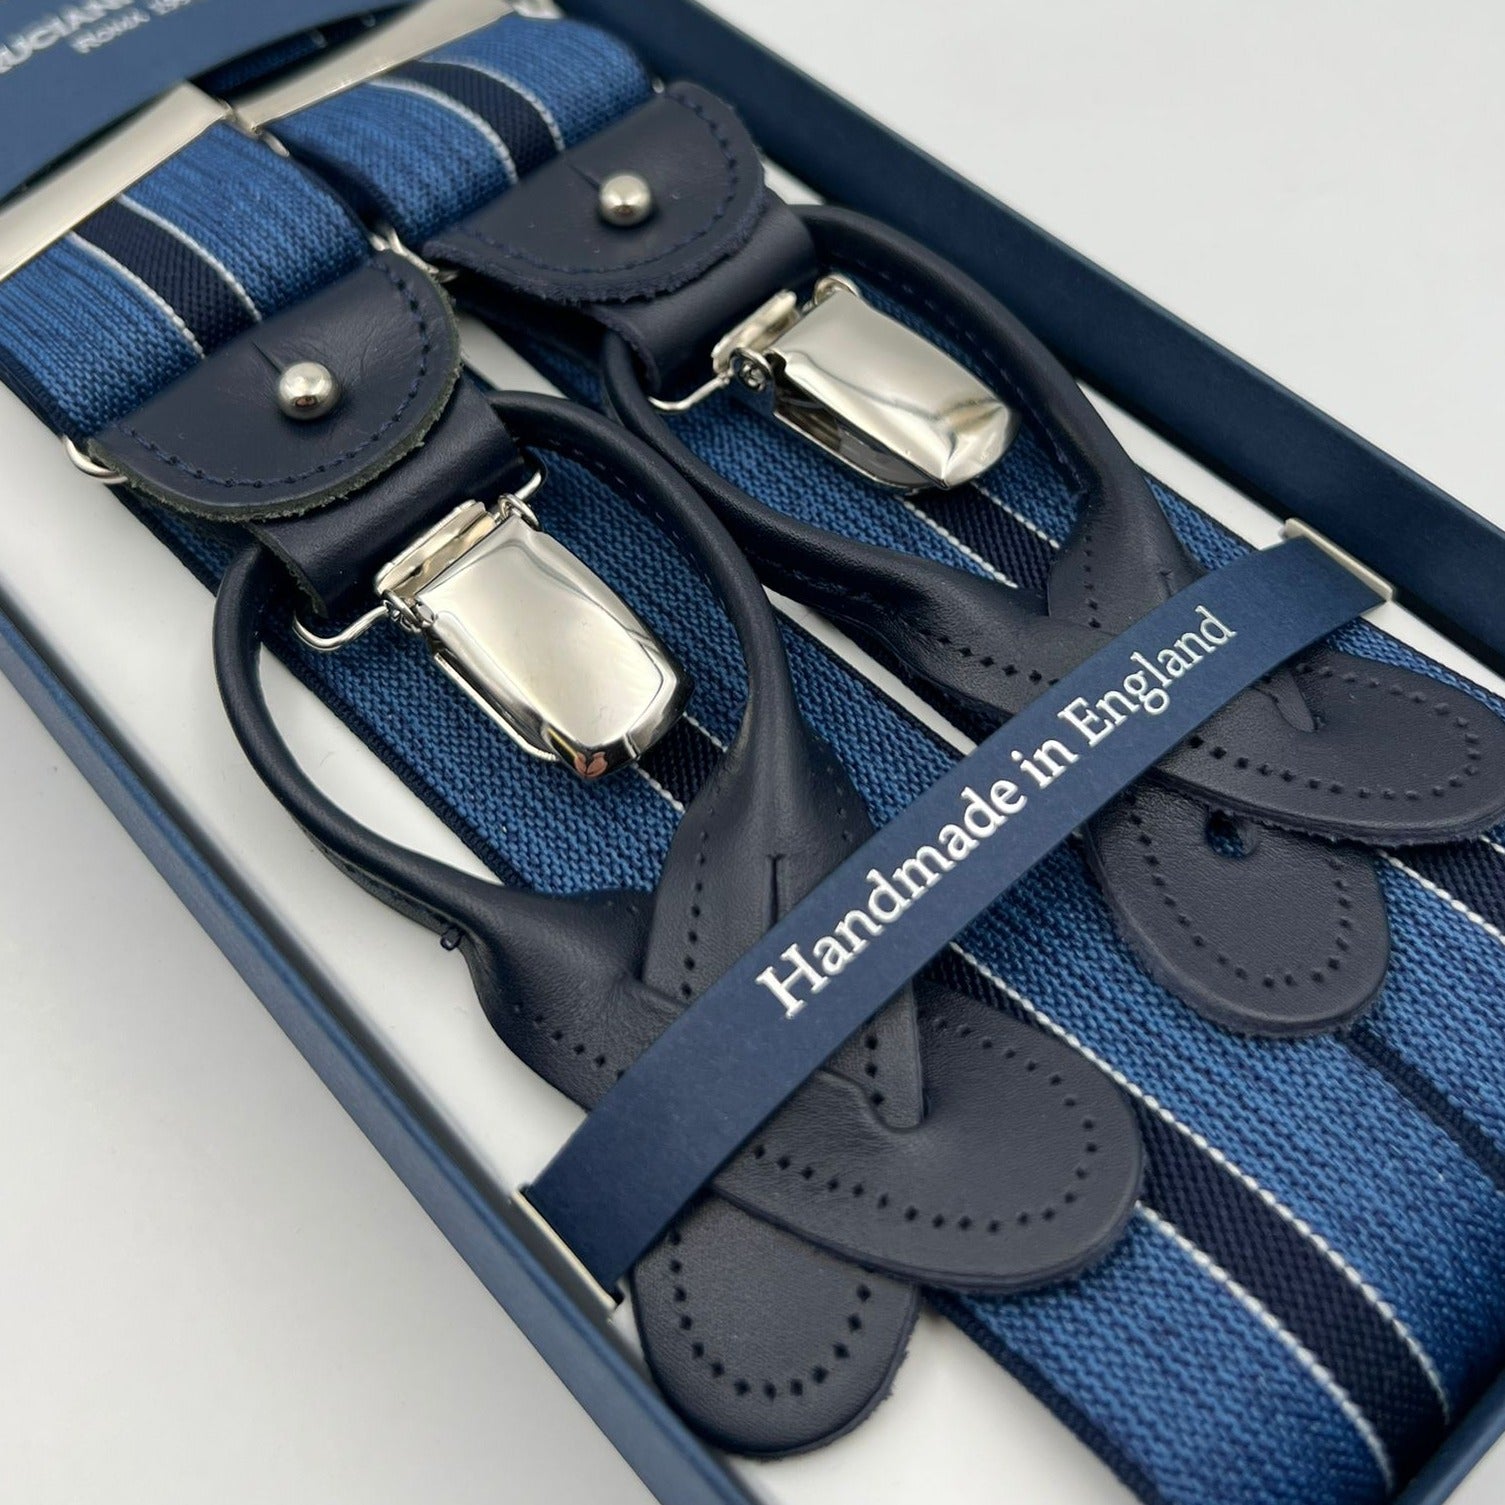 Albert Thurston for Cruciani & Bella Made in England 2 in 1 Adjustable Sizing 35 mm elastic braces Denim Blue and Blue Navy Stripes Y-Shaped Nickel Fittings Size Large #7393